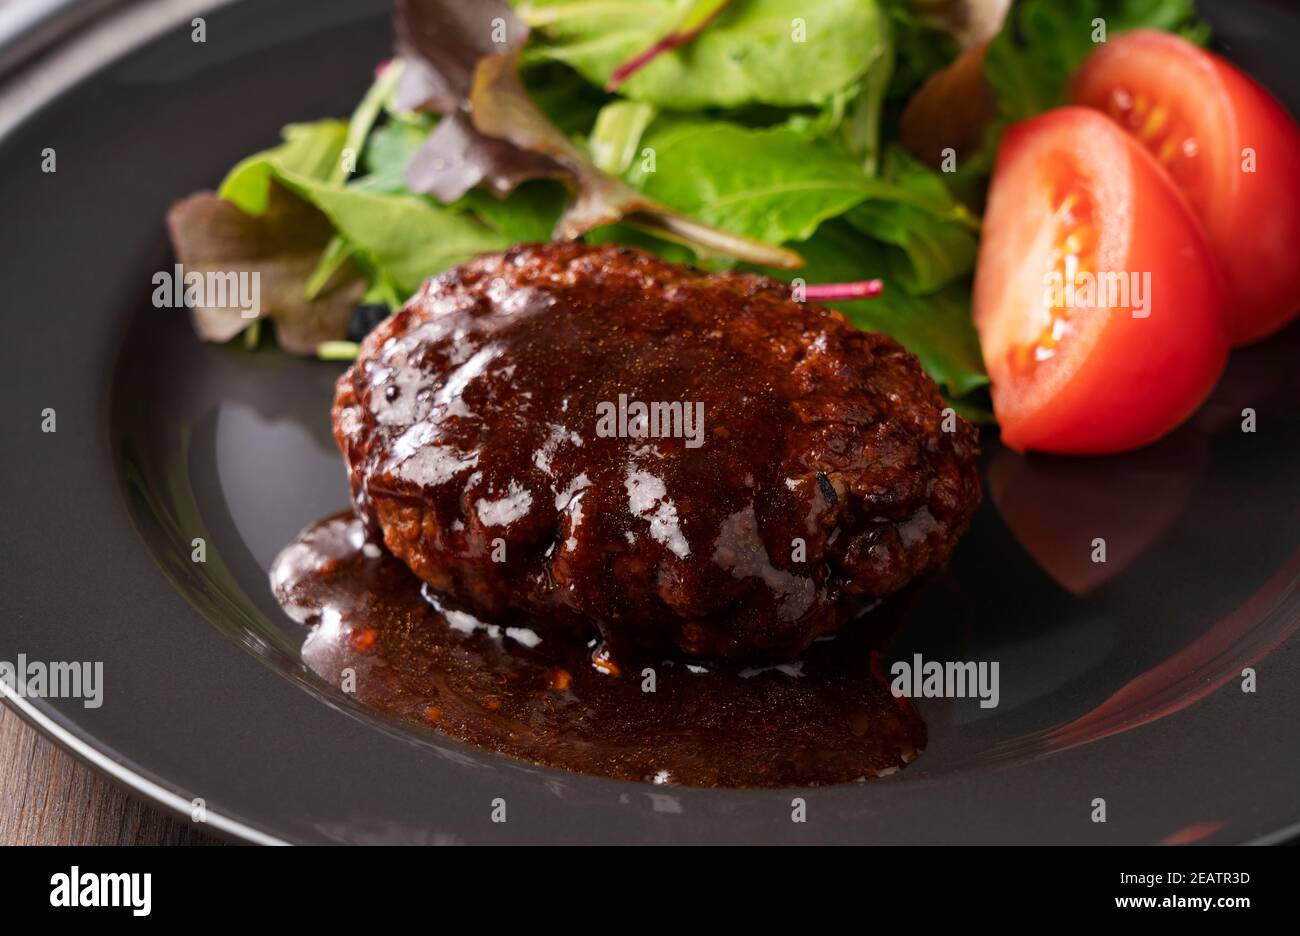 Hamburger with demi-glace sauce served on a plate placed on the table Stock Photo